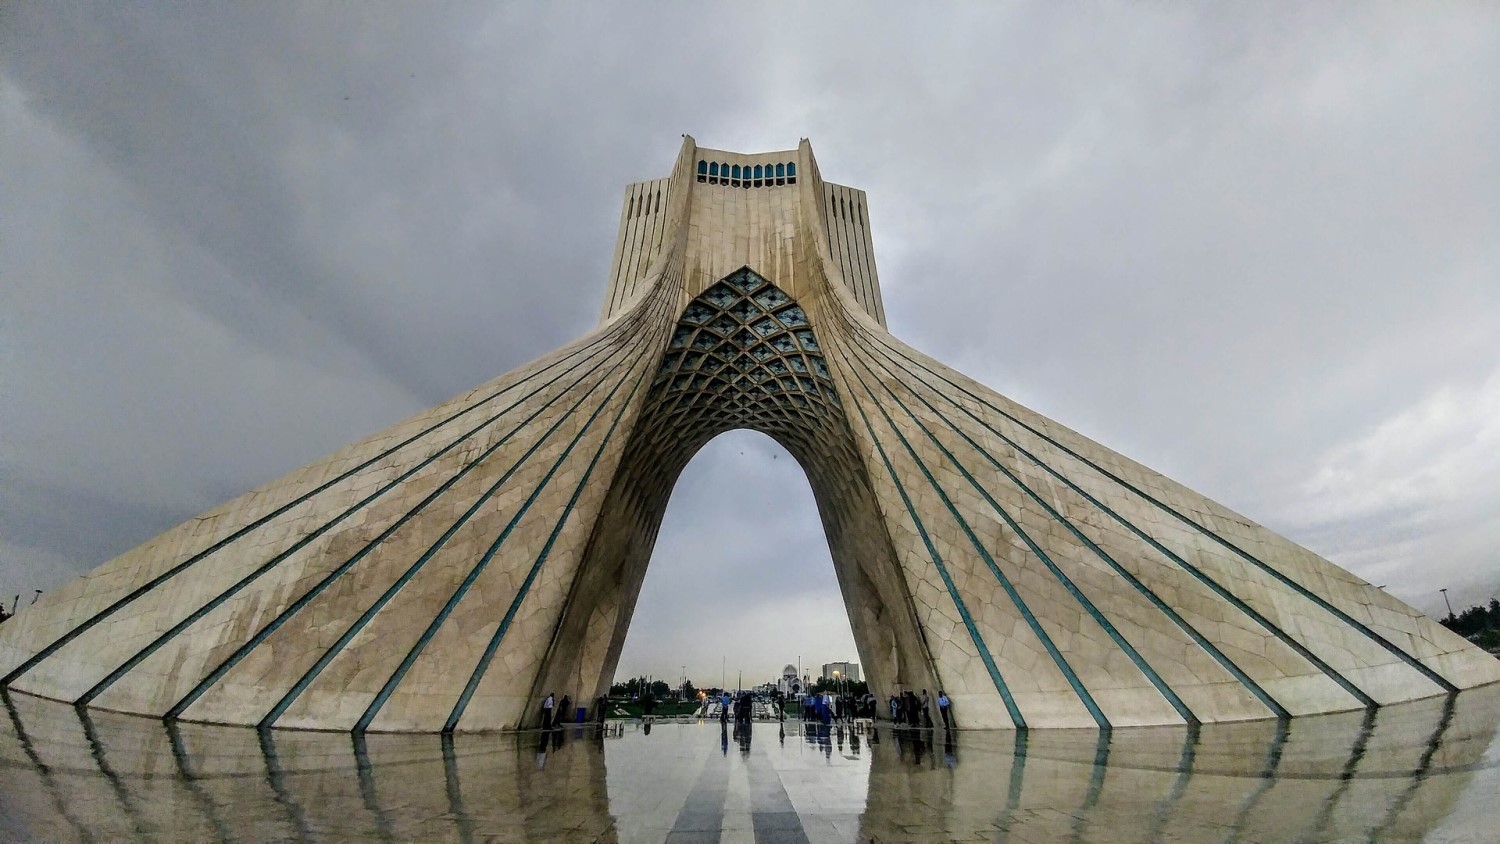 Iran-is-ripe-for-bitcoin-adoption,-even-as-government-clamps-down-on-mining